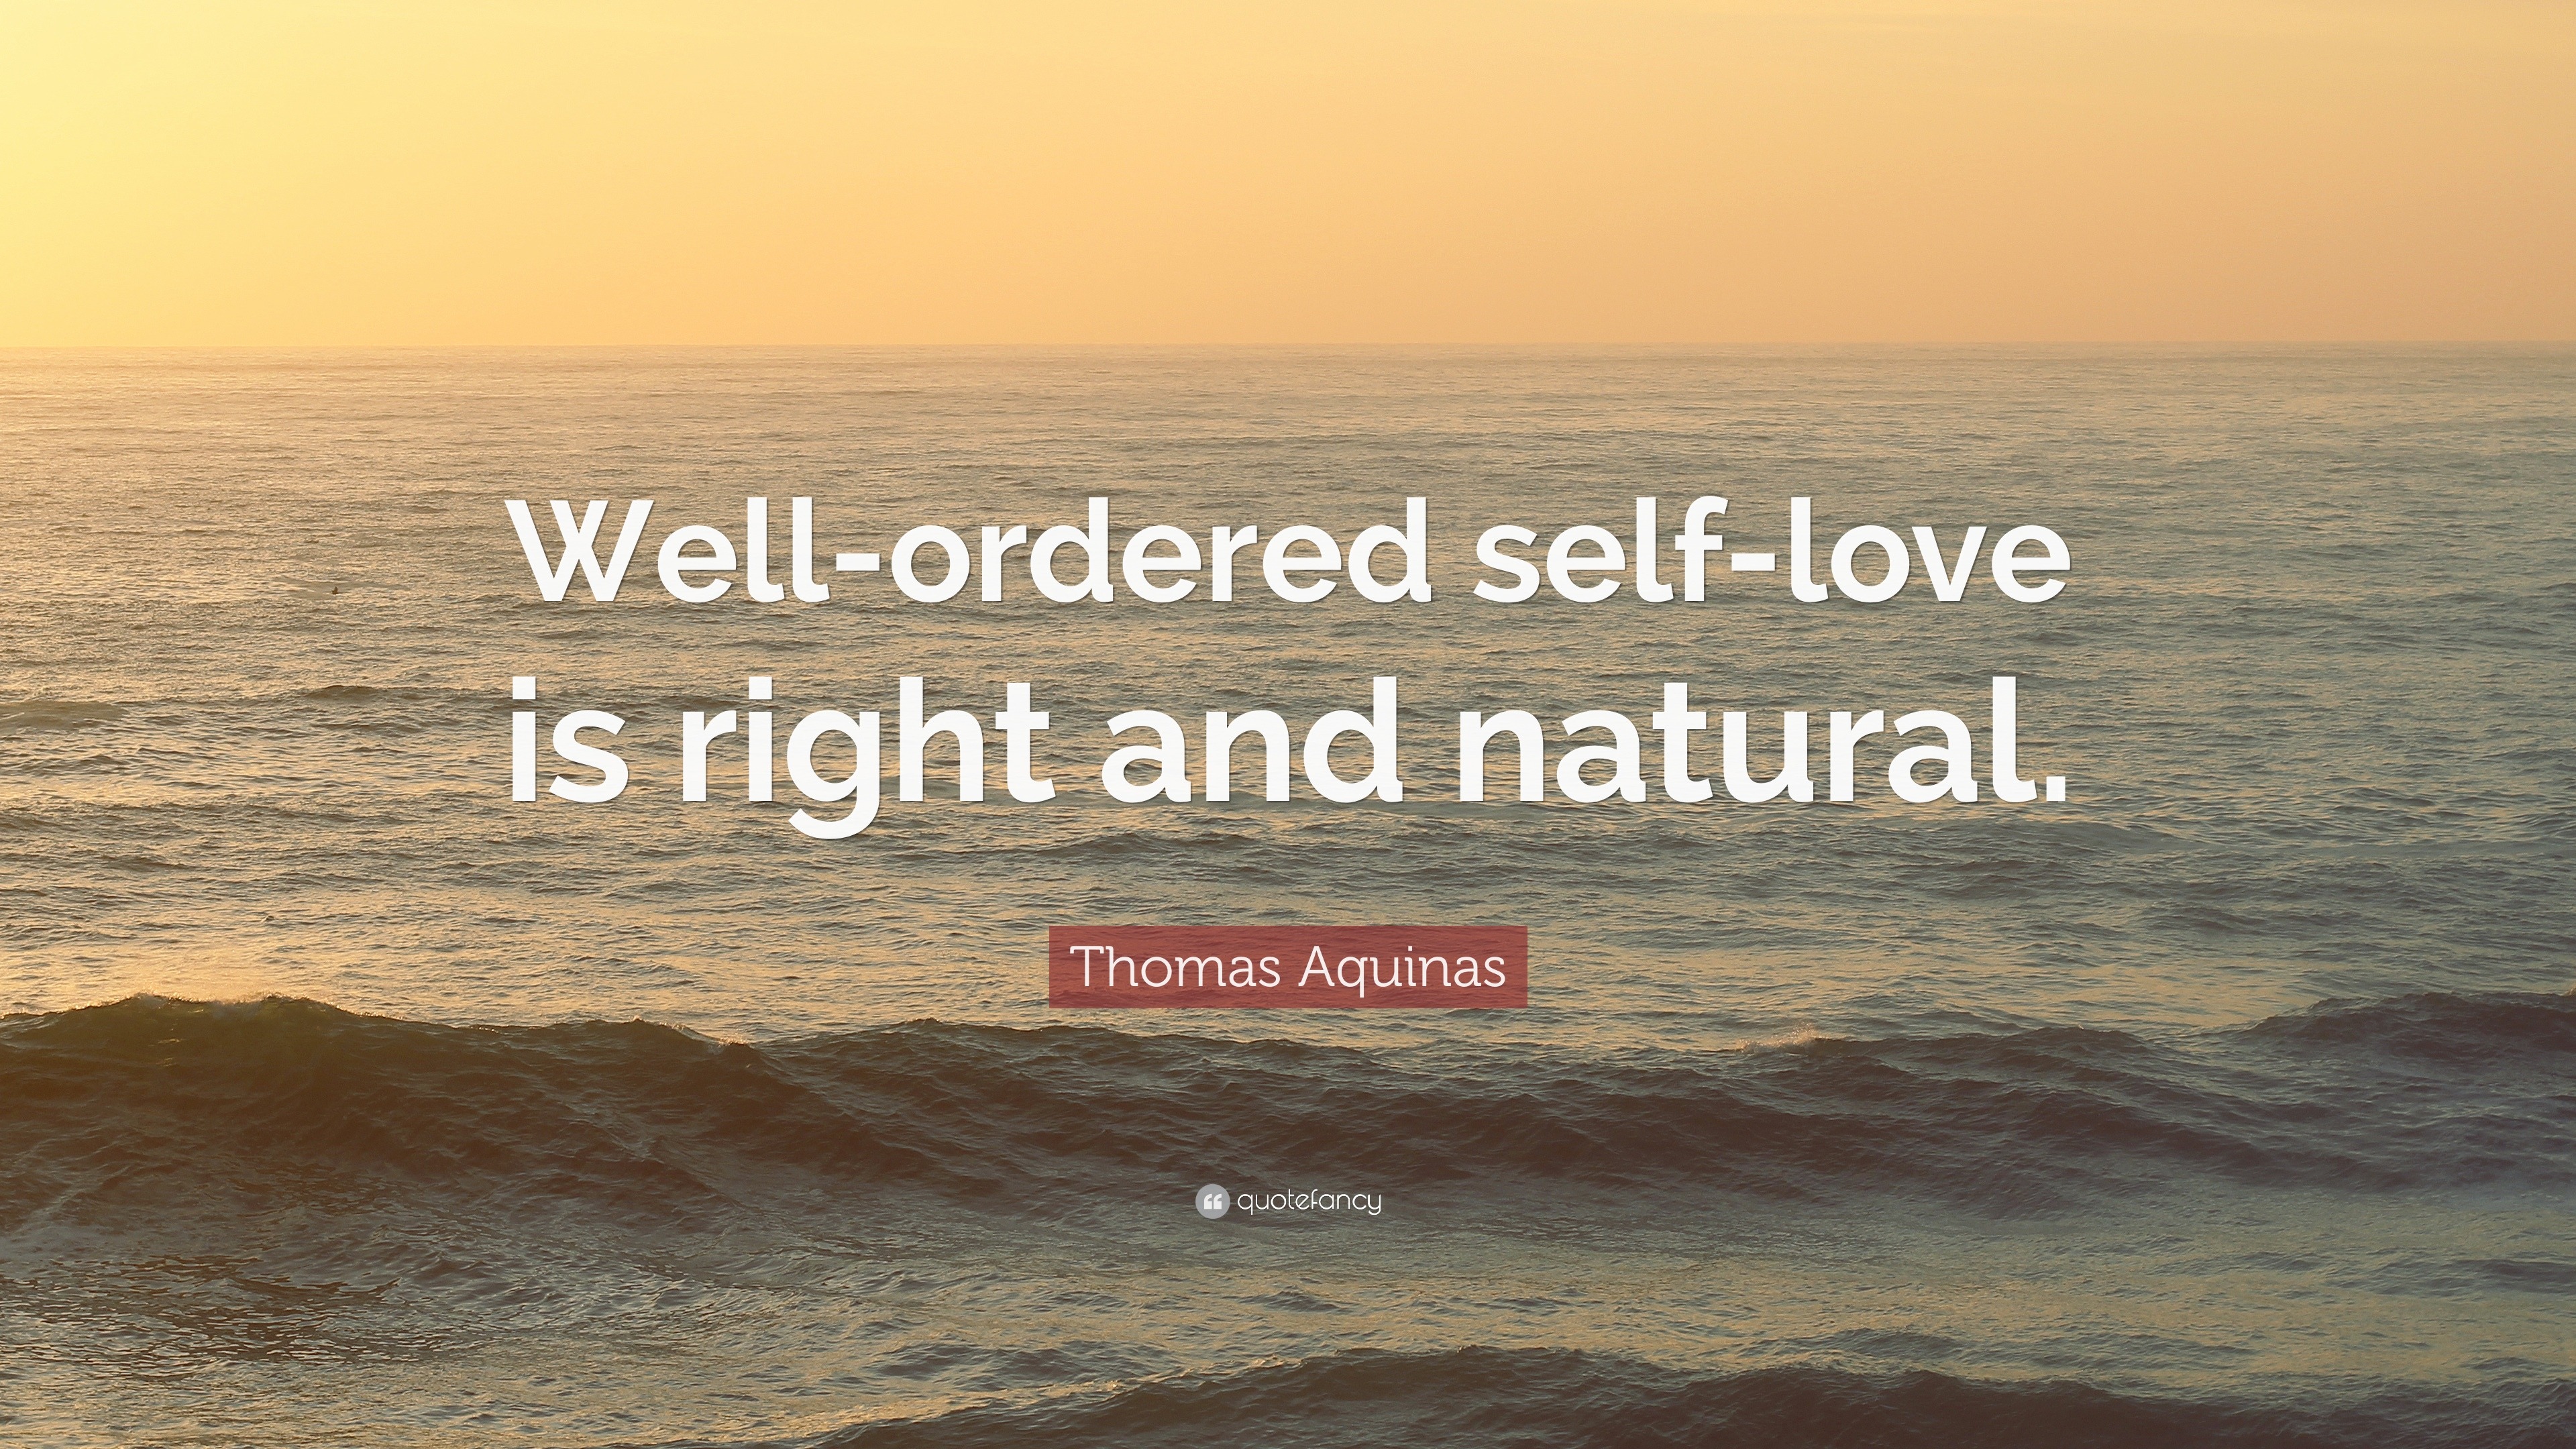 Thomas Aquinas Quote: "Well-ordered self-love is right and natural."